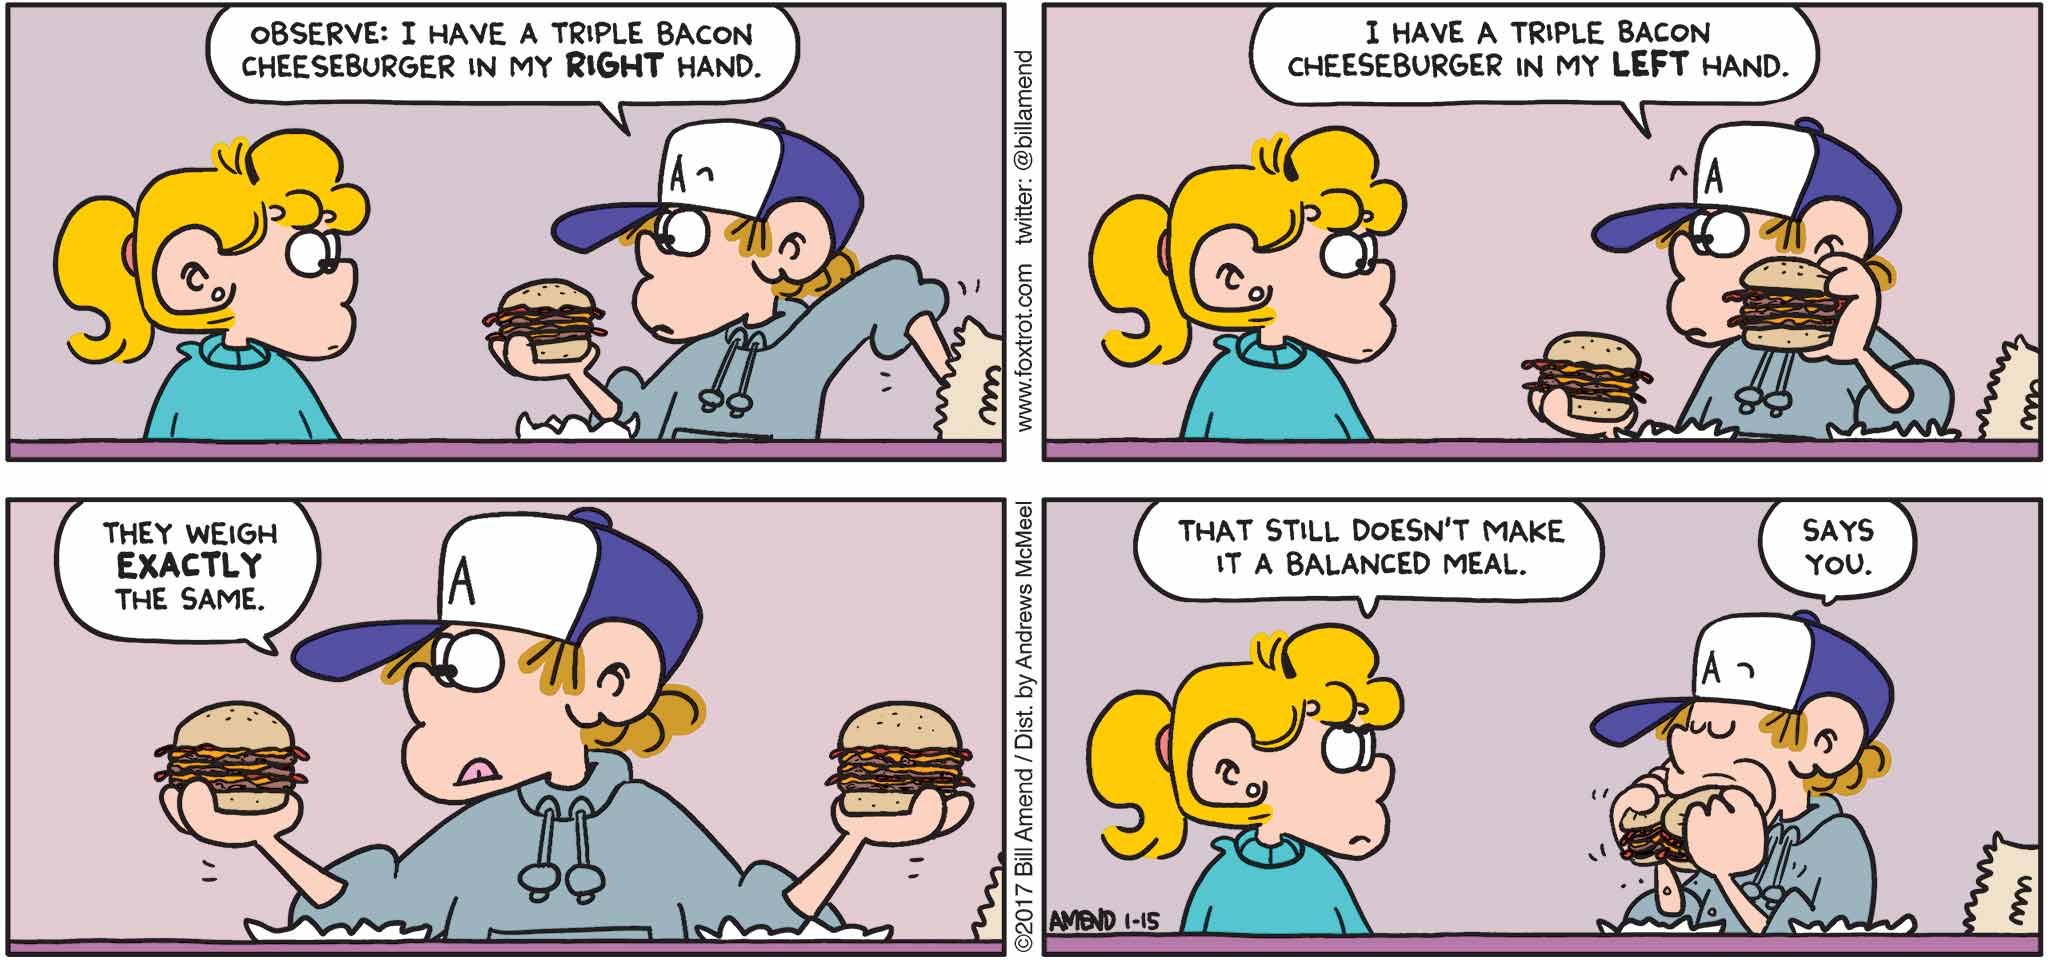 FoxTrot by Bill Amend - "Balancing Act" published January 29, 2017 - Peter says: Observe: I have a triple bacon cheeseburger in my right hand. I have a triple bacon cheeseburger in my left hand. They weigh exactly the same. Paige says: That still doesn't make it a balanced meal.  Peter says: Says you.